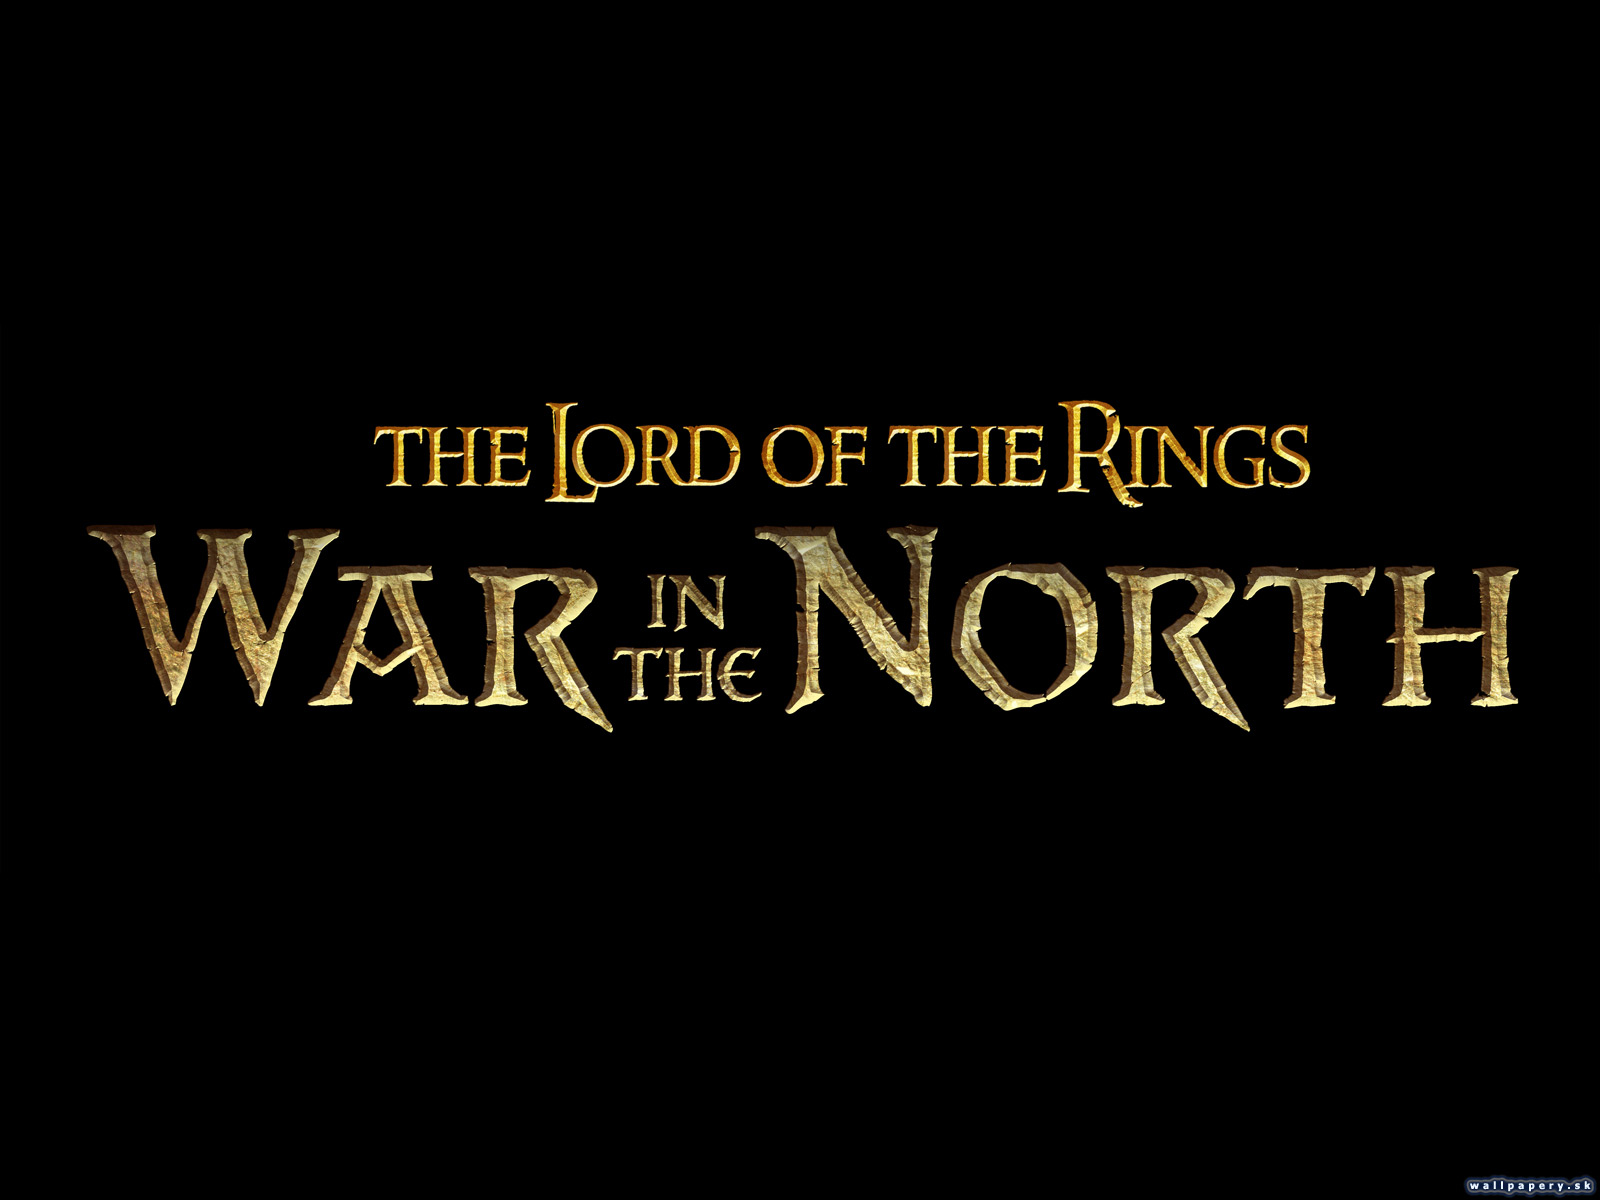 The Lord of the Rings: War in the North - wallpaper 2